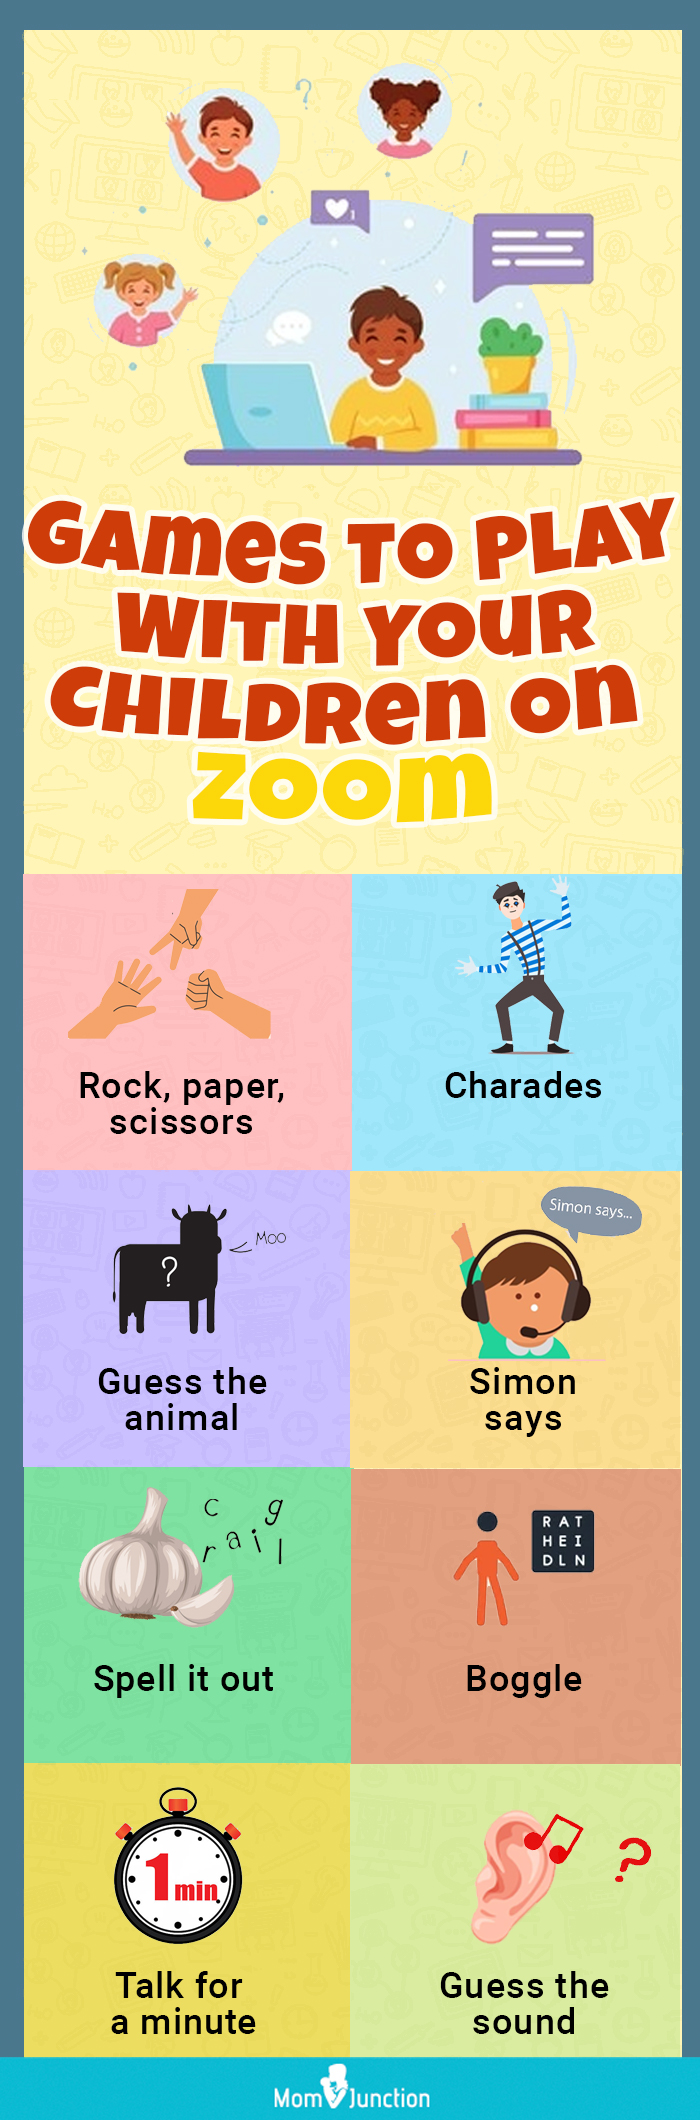 11 Fun Games to Play on Zoom - Easy Virtual Zoom Games